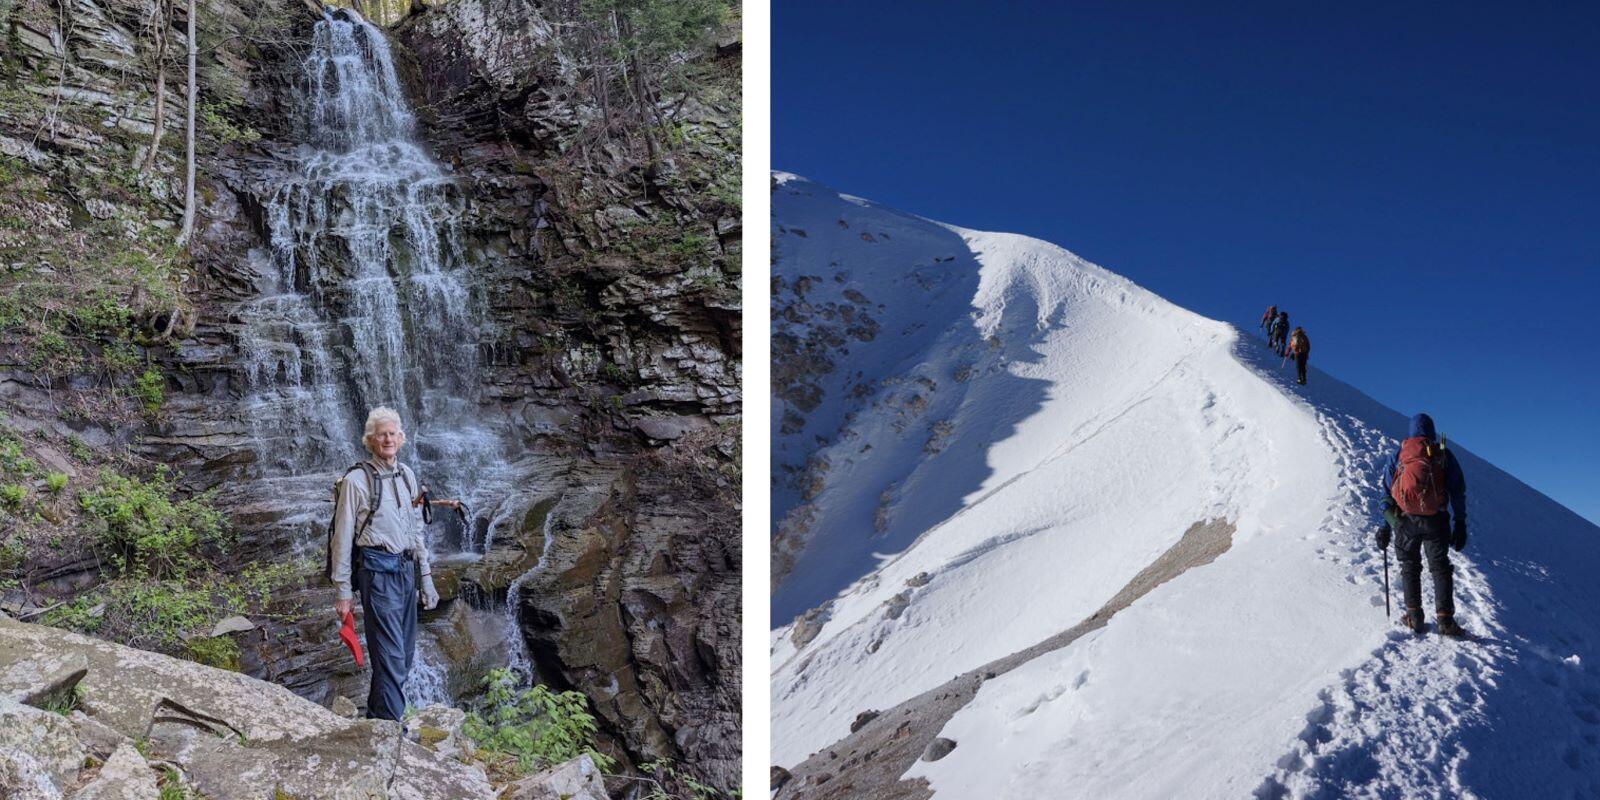 On the left is a photo of a man in front of a waterfall going down the side of a rocky mountain. On the right is a photo of three people climbing up a snowy peak of a mountain. 